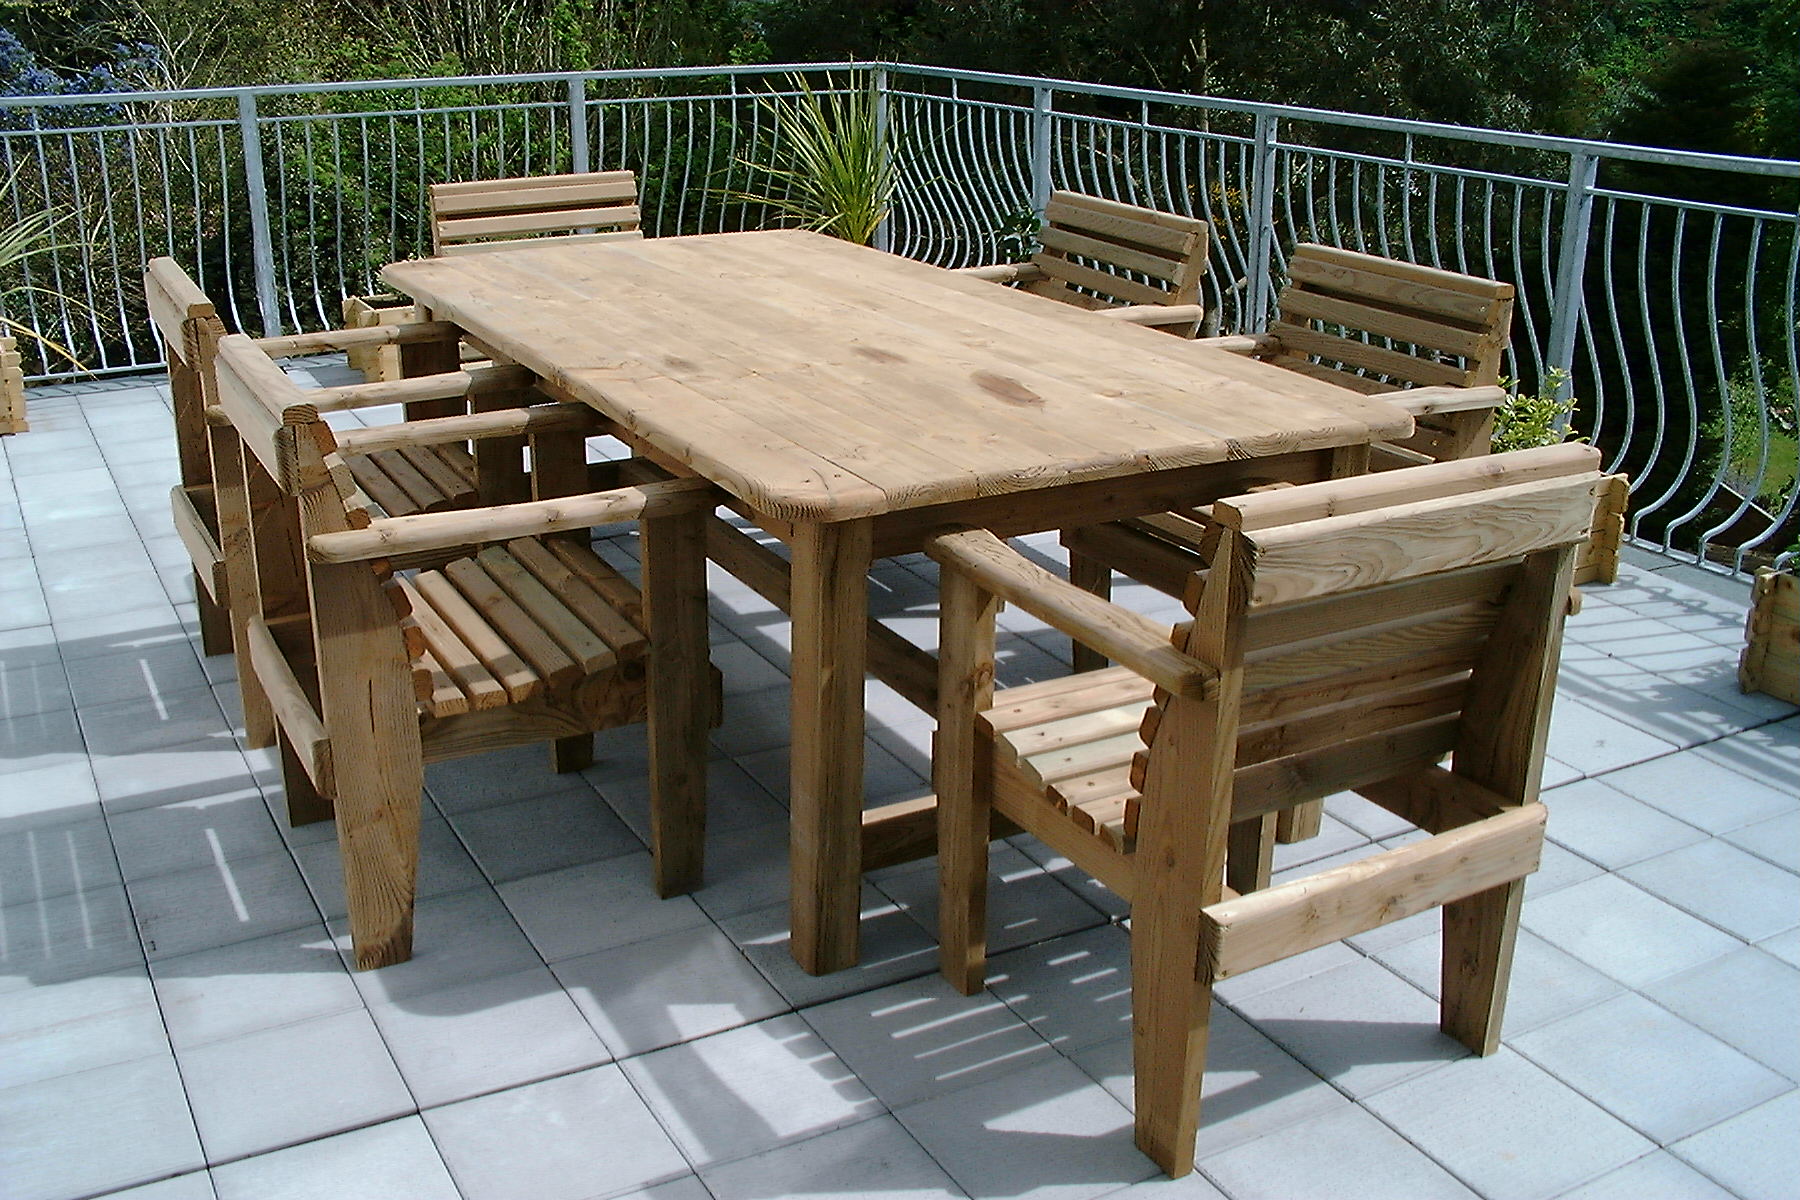 garden table and chairs round wooden garden table and 6 chairs starrkingschool MHCQOFY